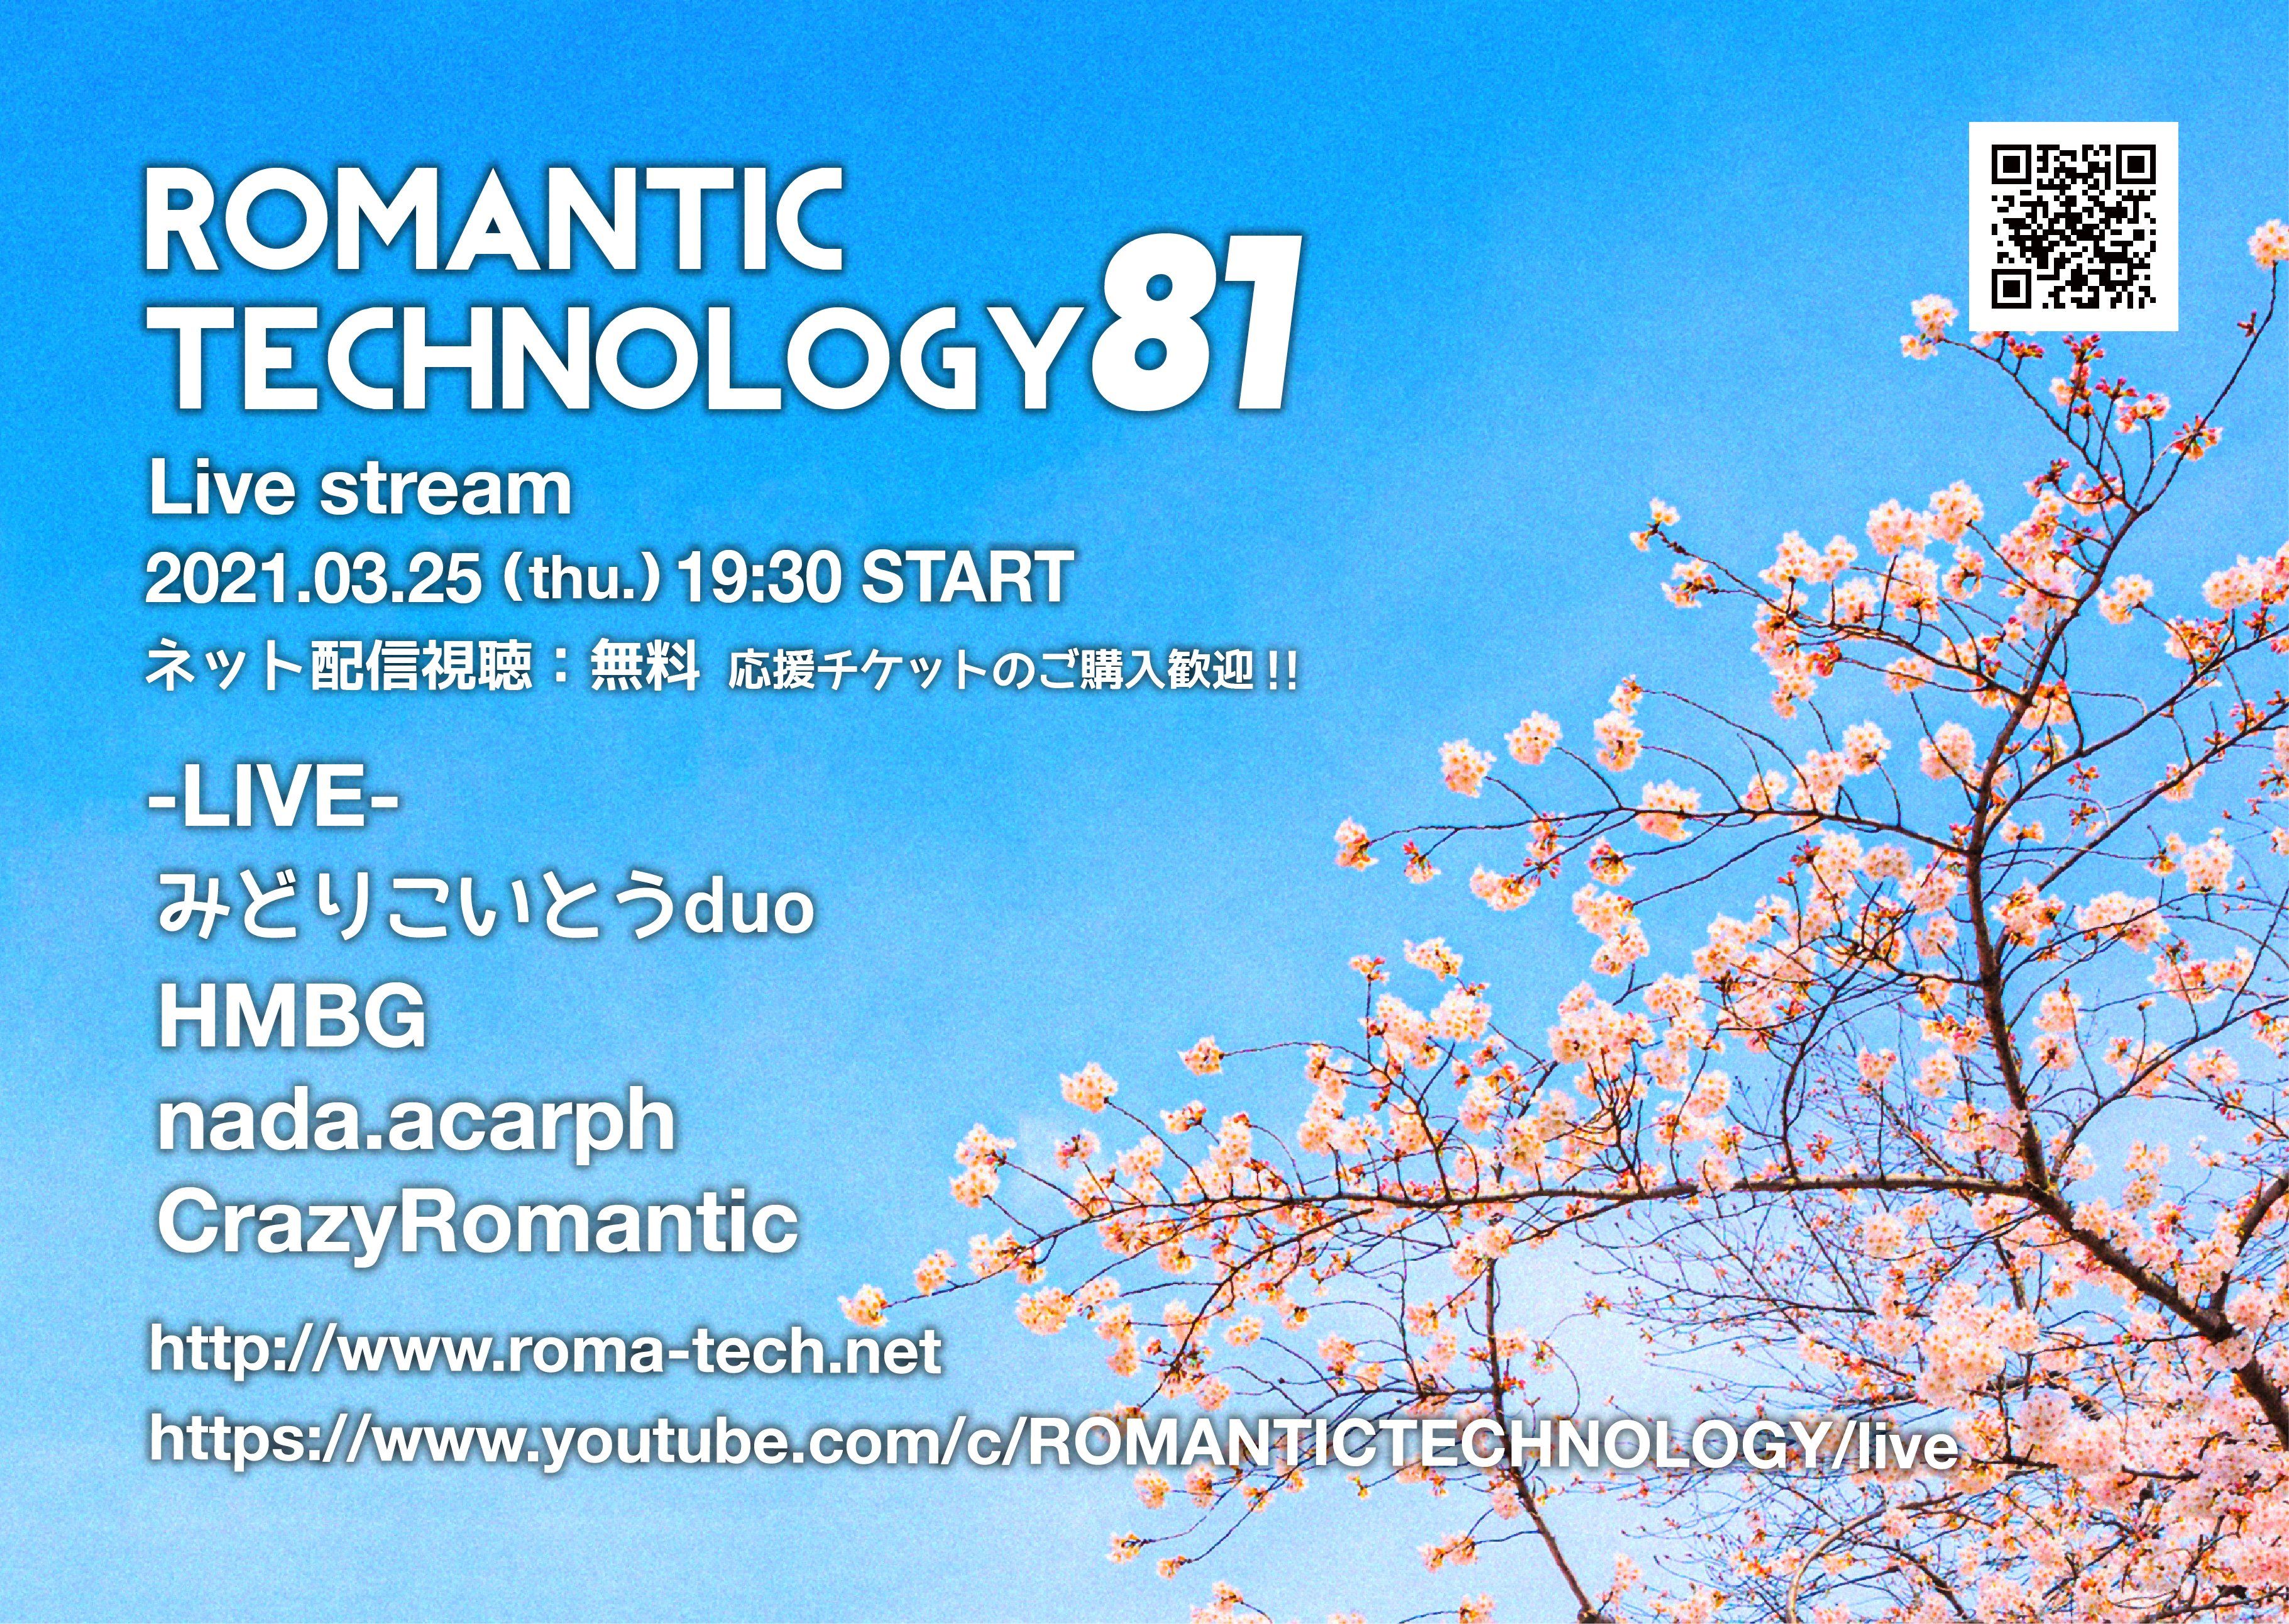 [Live Streaming] ROMANTIC TECHNOLOGY 81